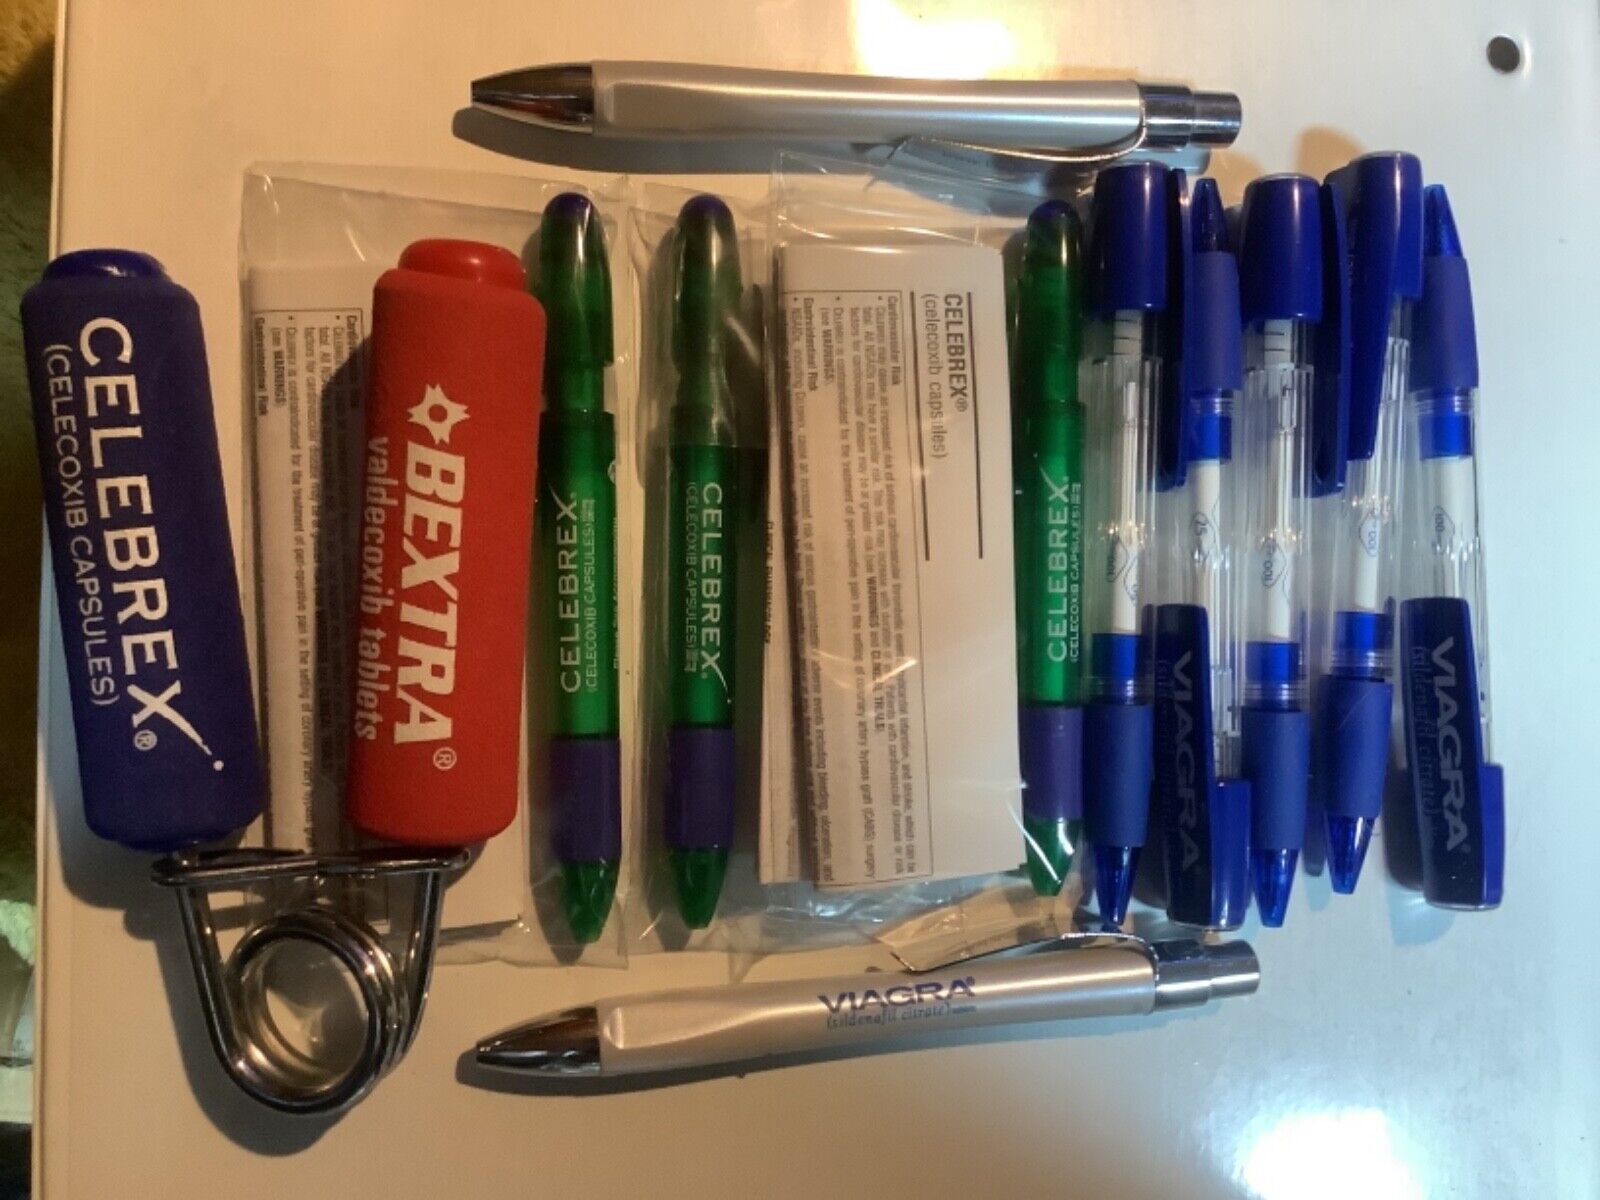 Rare grip strength device plus viagra and other pens